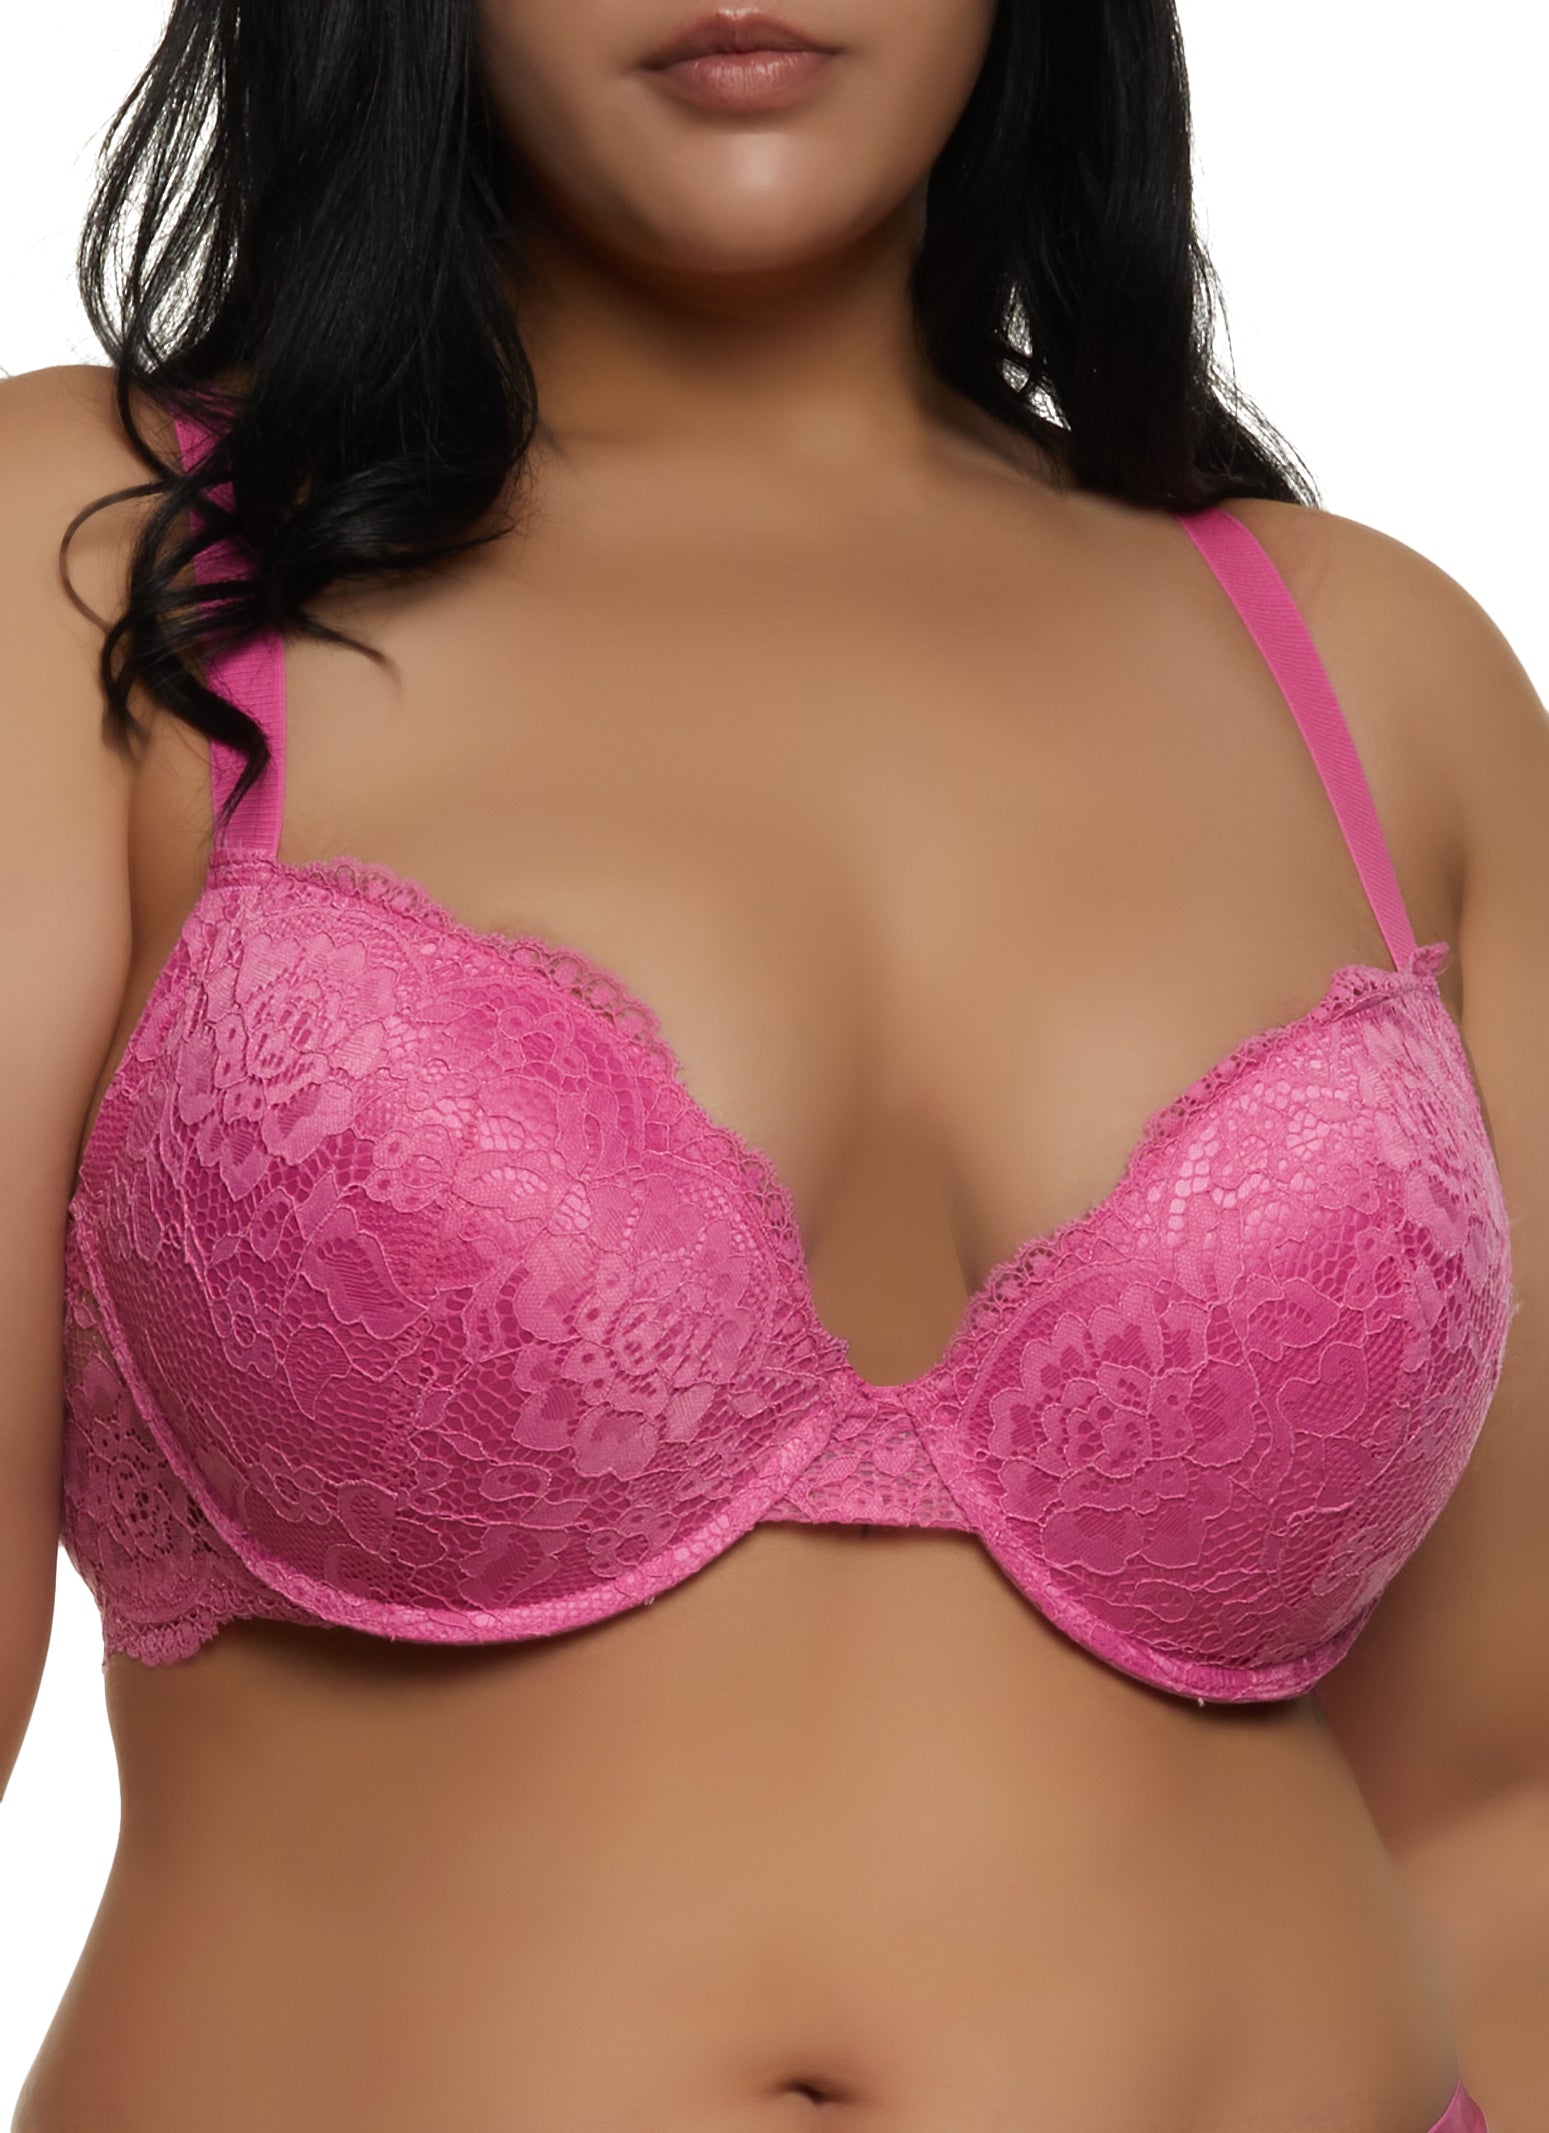 Plus Size Lingerie Sets, Everyday Low Prices